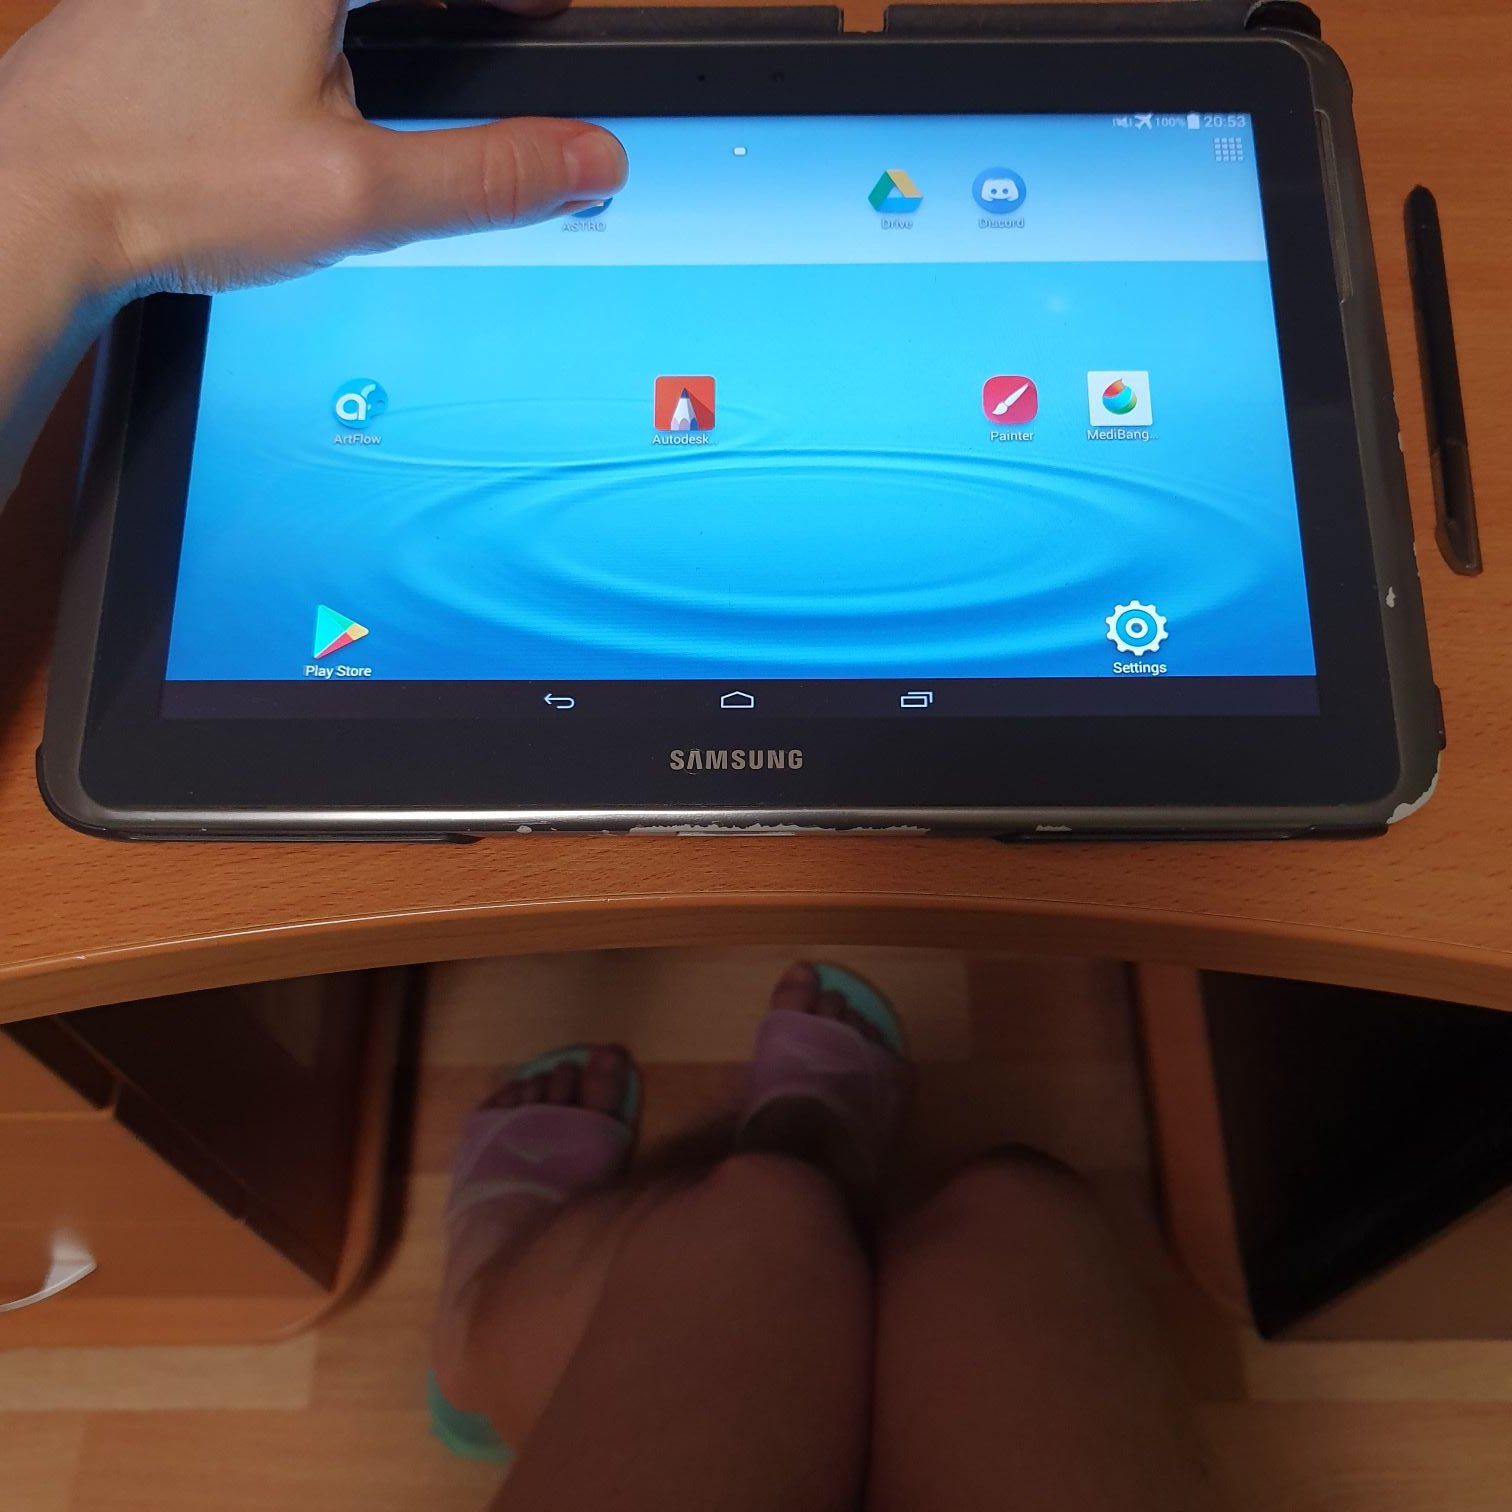 Samsung Galaxy Note 10.1 tablet for the artist